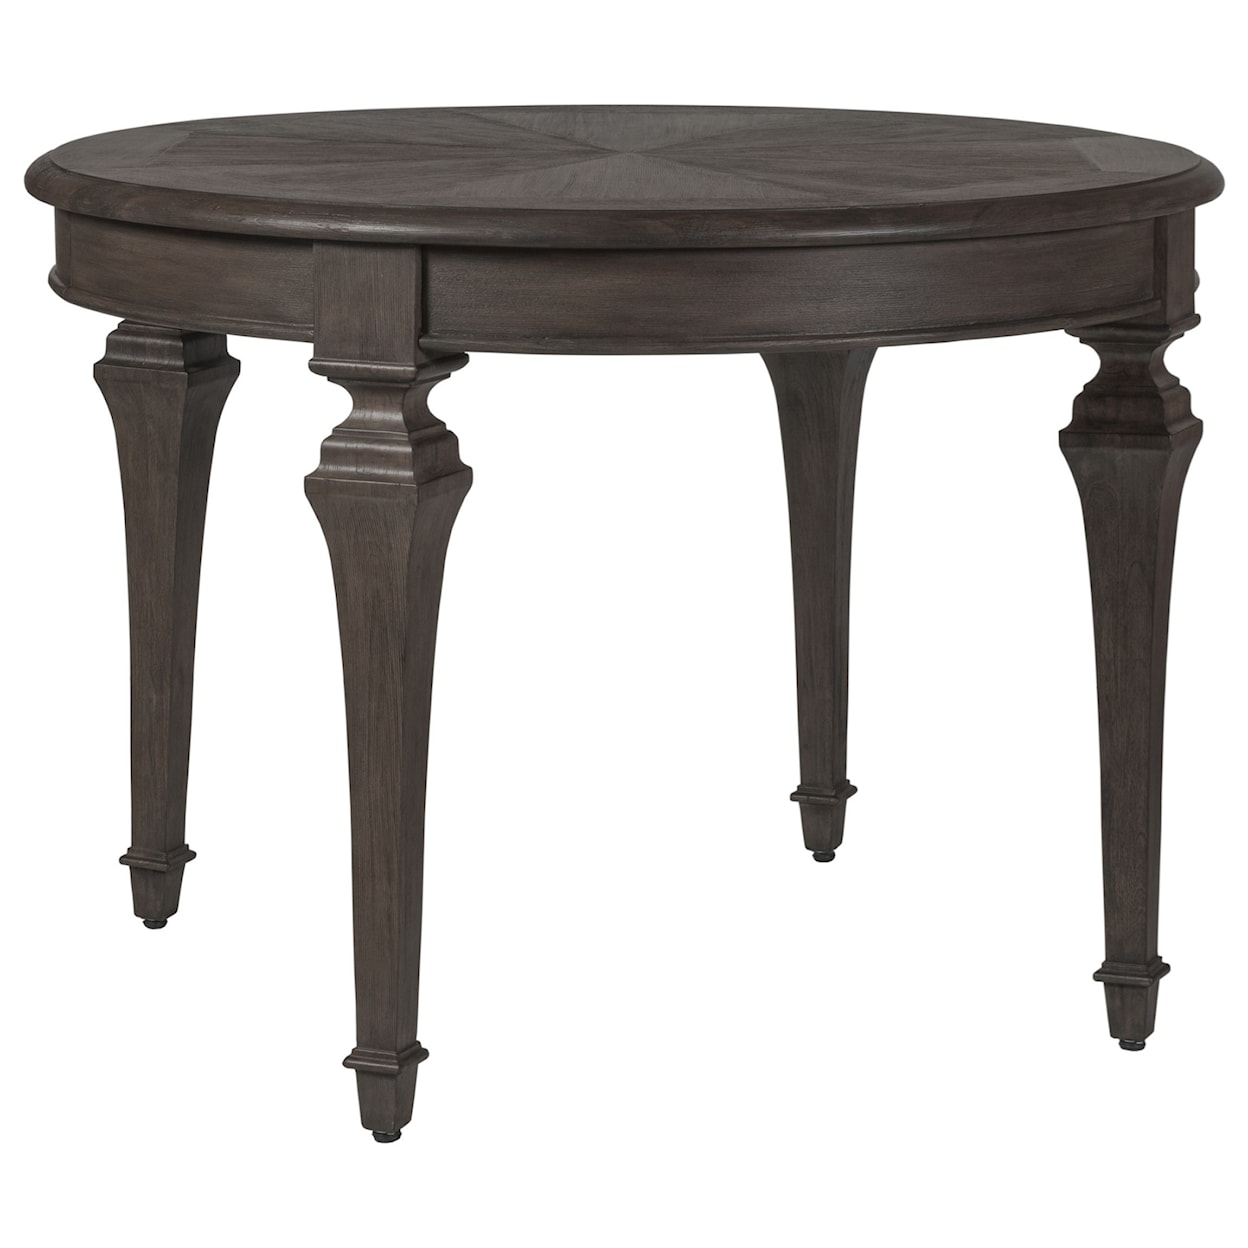 Artistica Cohesion Apertif Round/Oval Dining Table